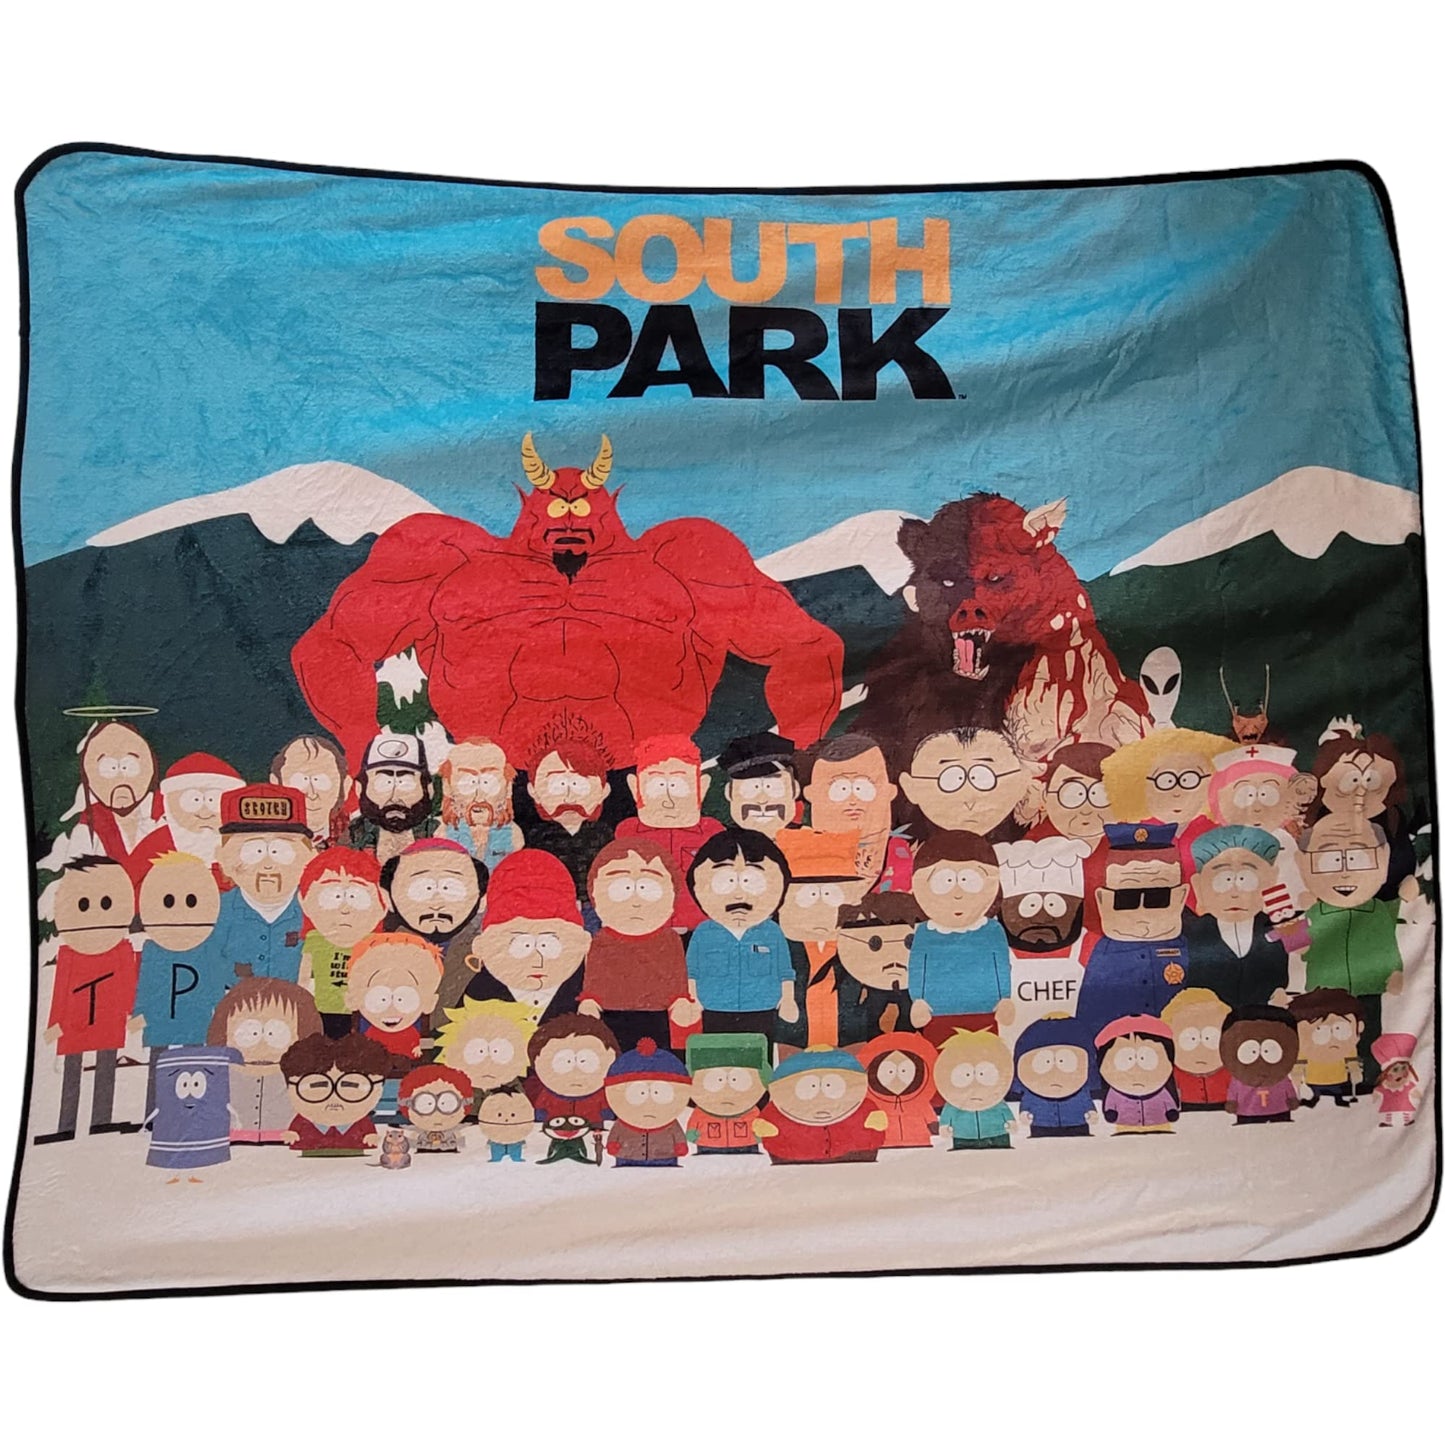 Bazillion Dreams South Park Characters Fleece Fleece Softest Comfy Throw Blanket for Adults & Kids | Measures 60 x 50 Inches